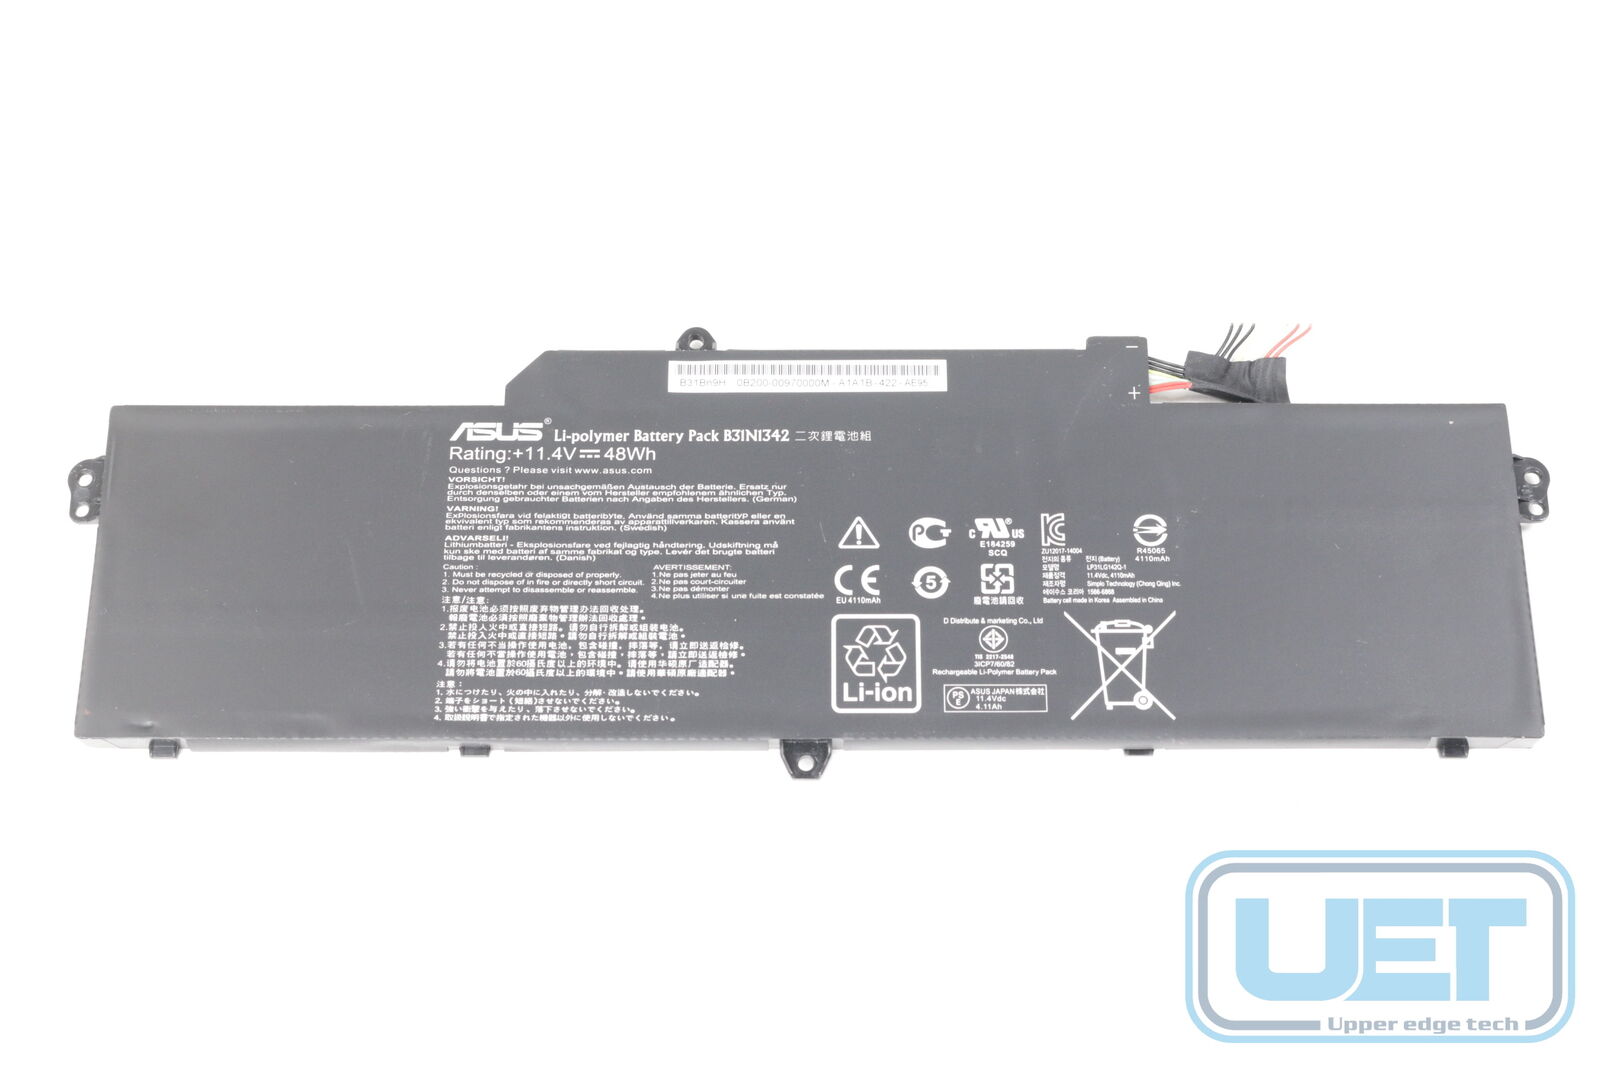 Asus Chromebook C200M Genuine Battery 0B200-00970000 3Cell 48Whr Tested Warranty